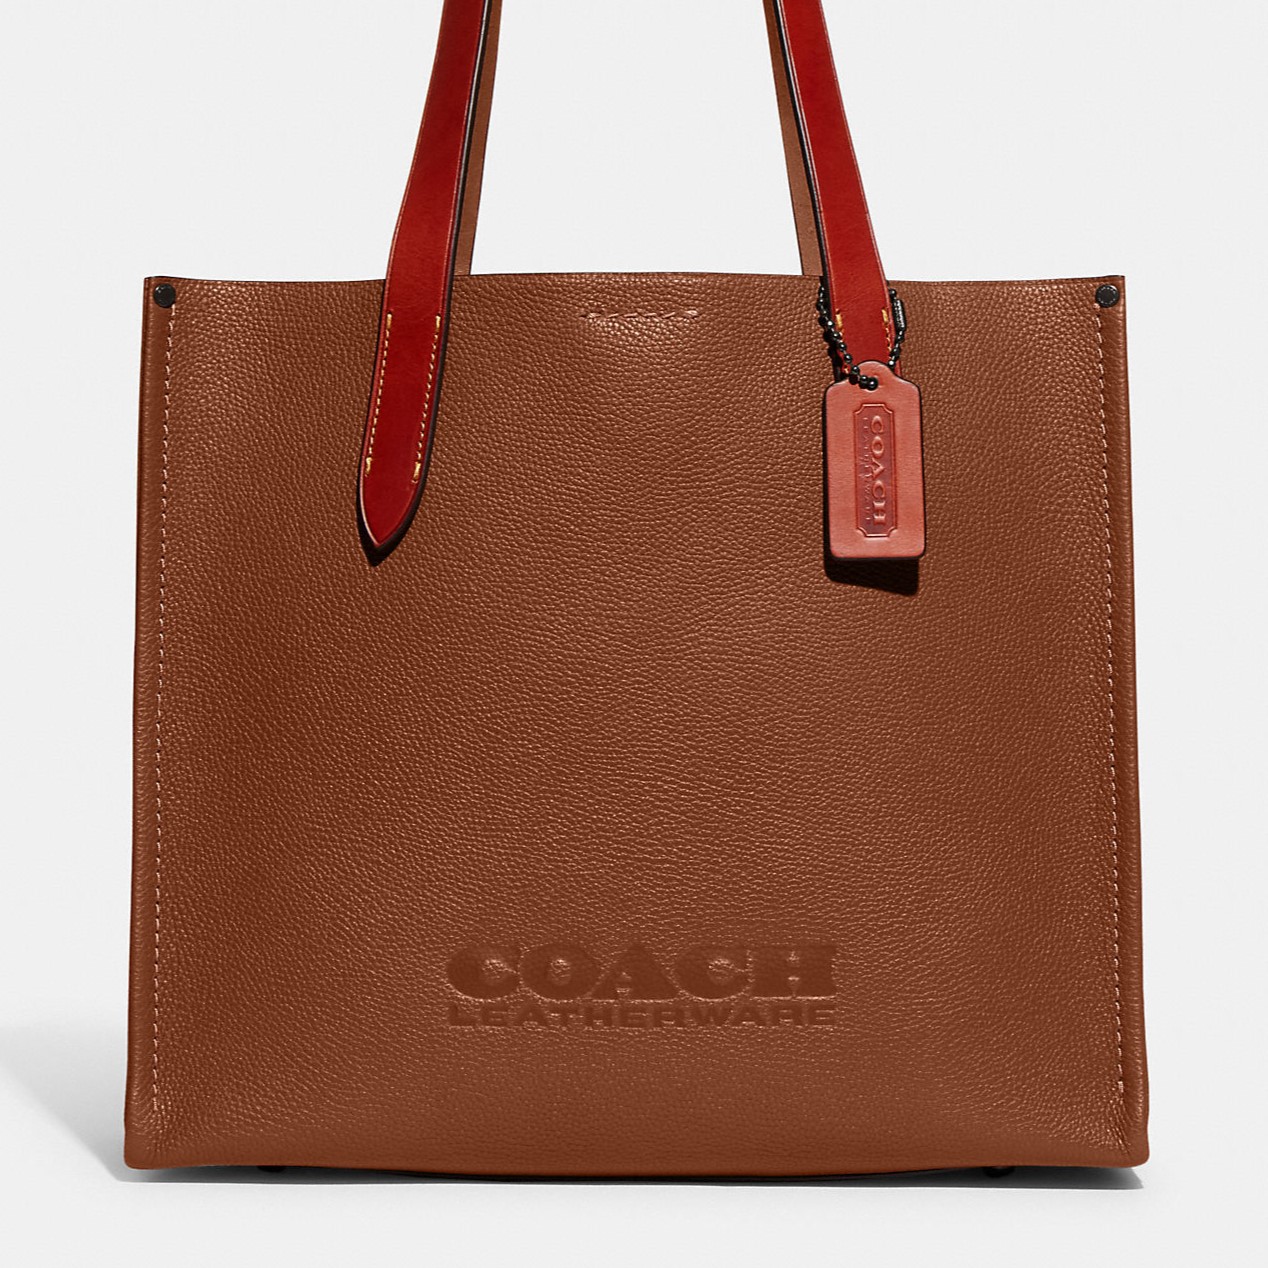 TÚI TOTE COACH RELAY TOTE 34 POLISHED PEBBLE LEATHER BAG CH757 8